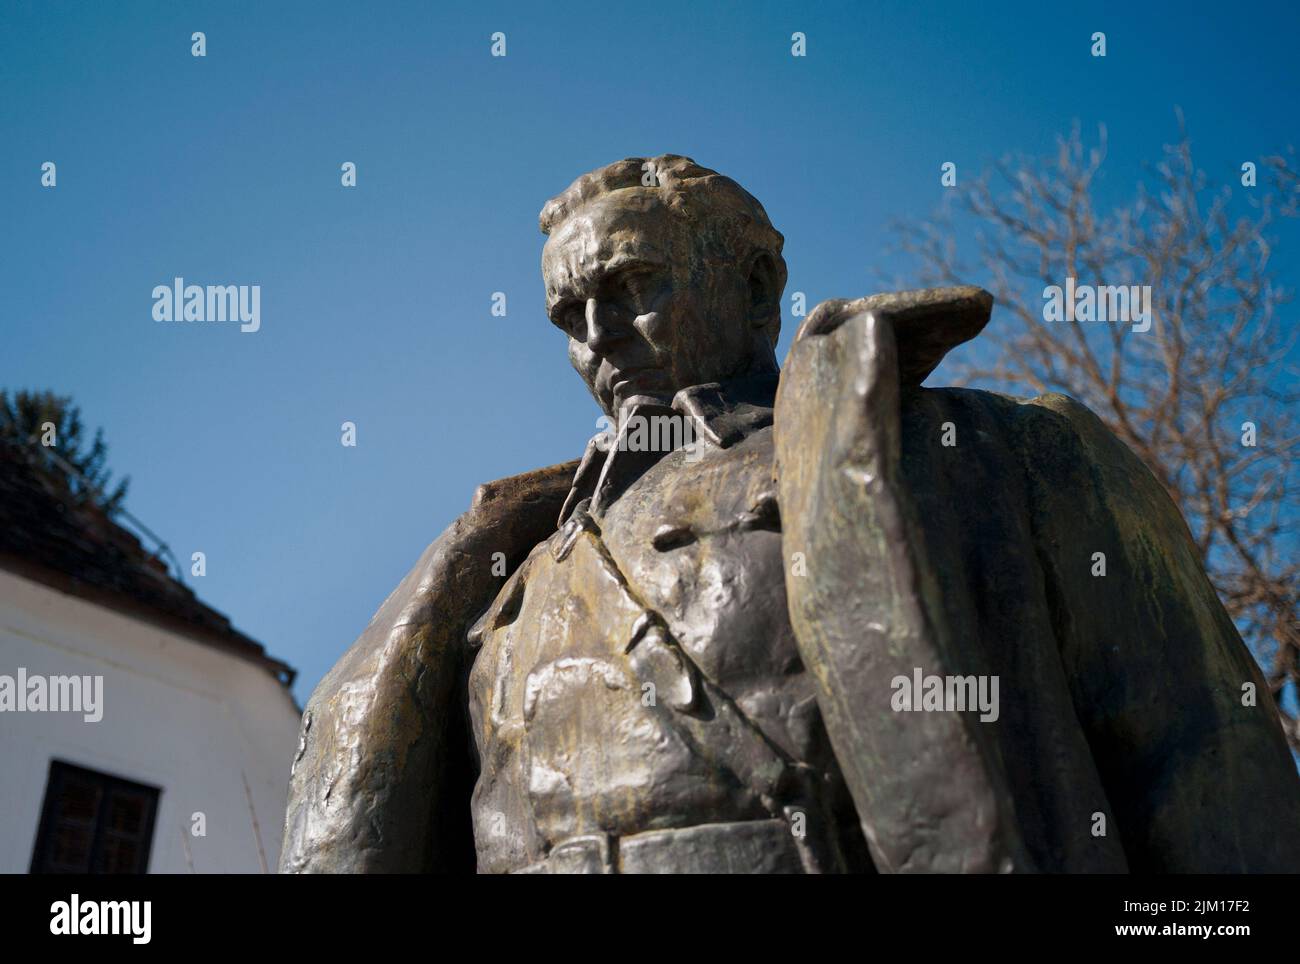 Kumrovec, Croatia. A statue of Tito, President of Yugoslavia, stands outside the village home he was born in. Stock Photo